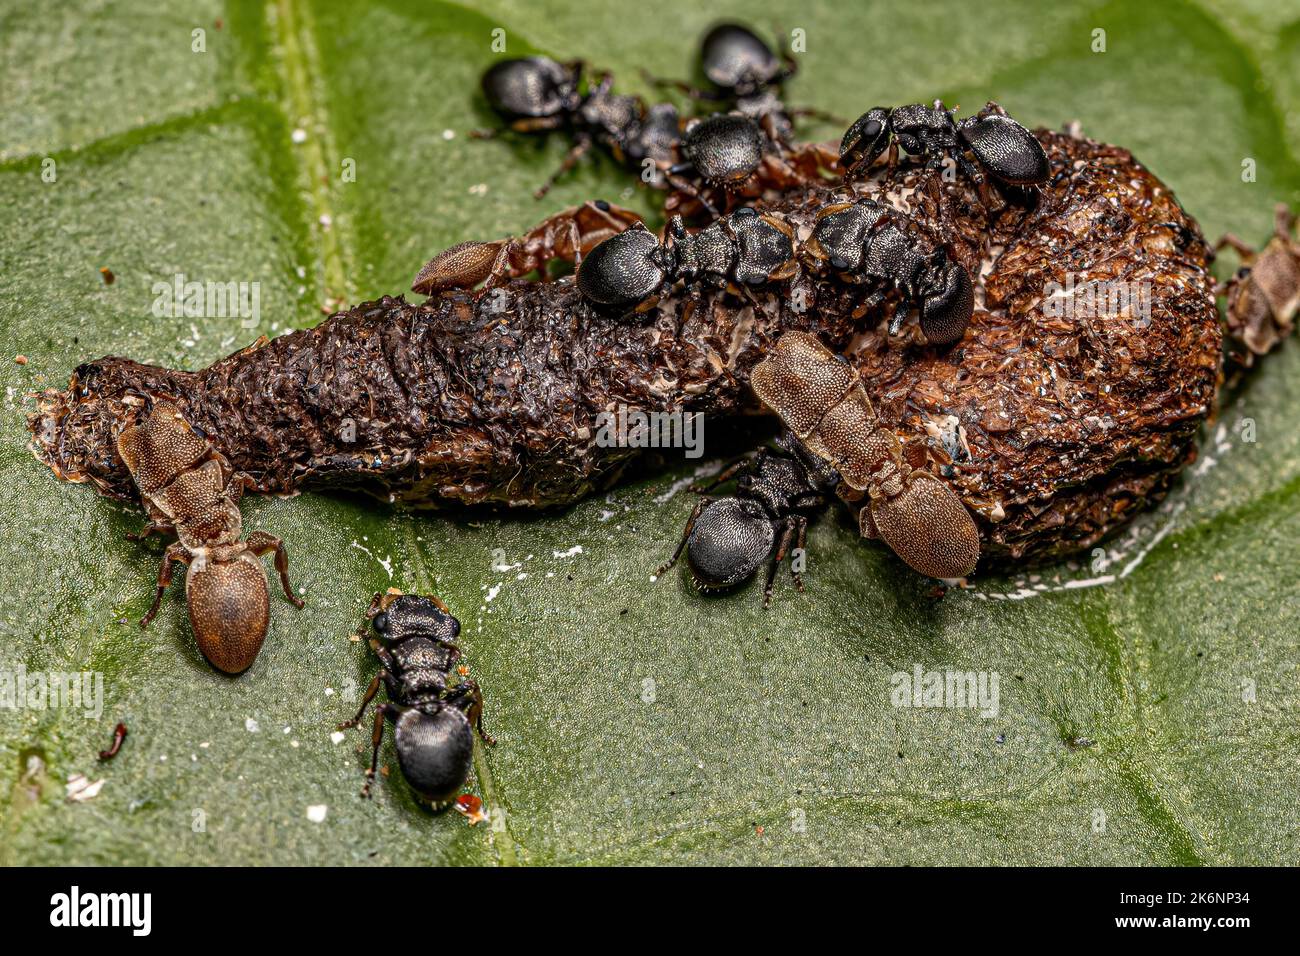 Adult Turtle Ants of the genus Cephalotes eating feces on a leaf Stock Photo